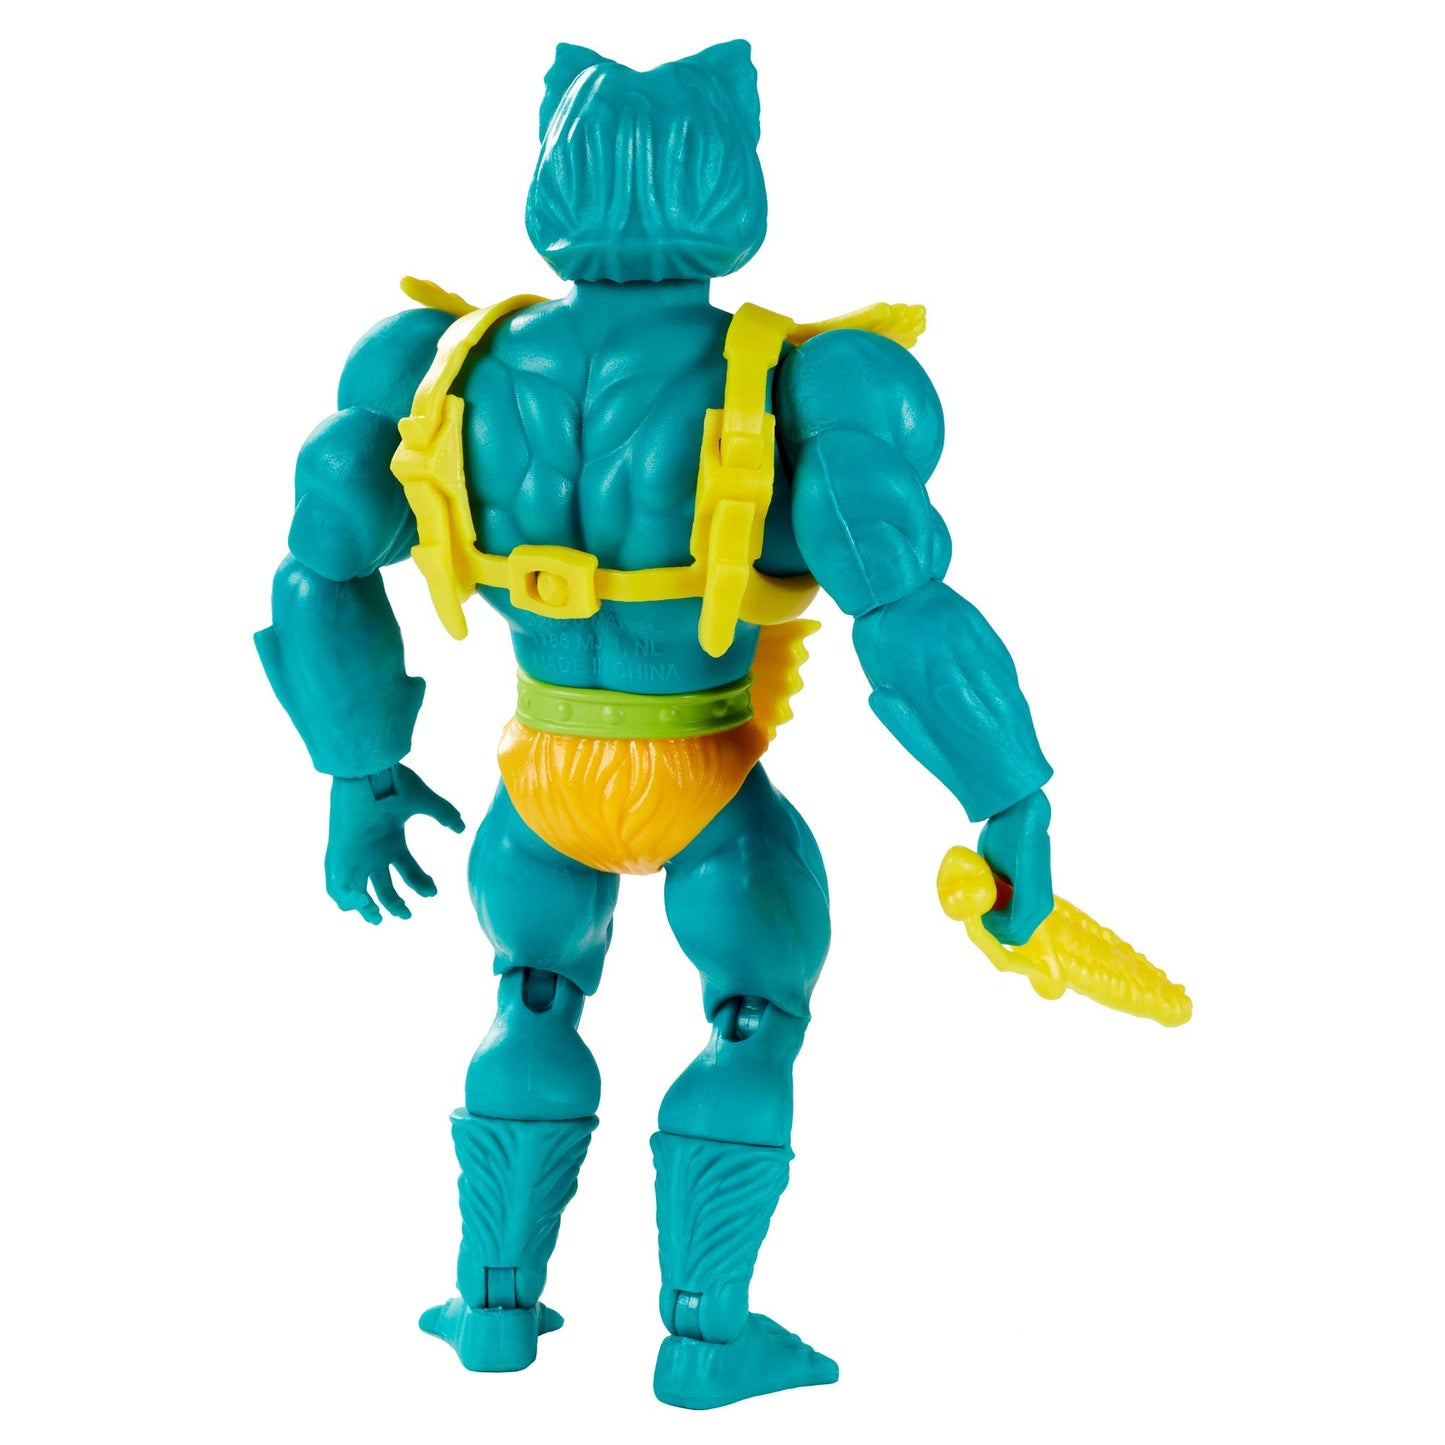 Masters of the Universe Origins Mer-Man 5.5-in Action Figure, Battle Figure for Storytelling Play and Display, Gift for 6 to 10-Year-Olds and Adult Collectors